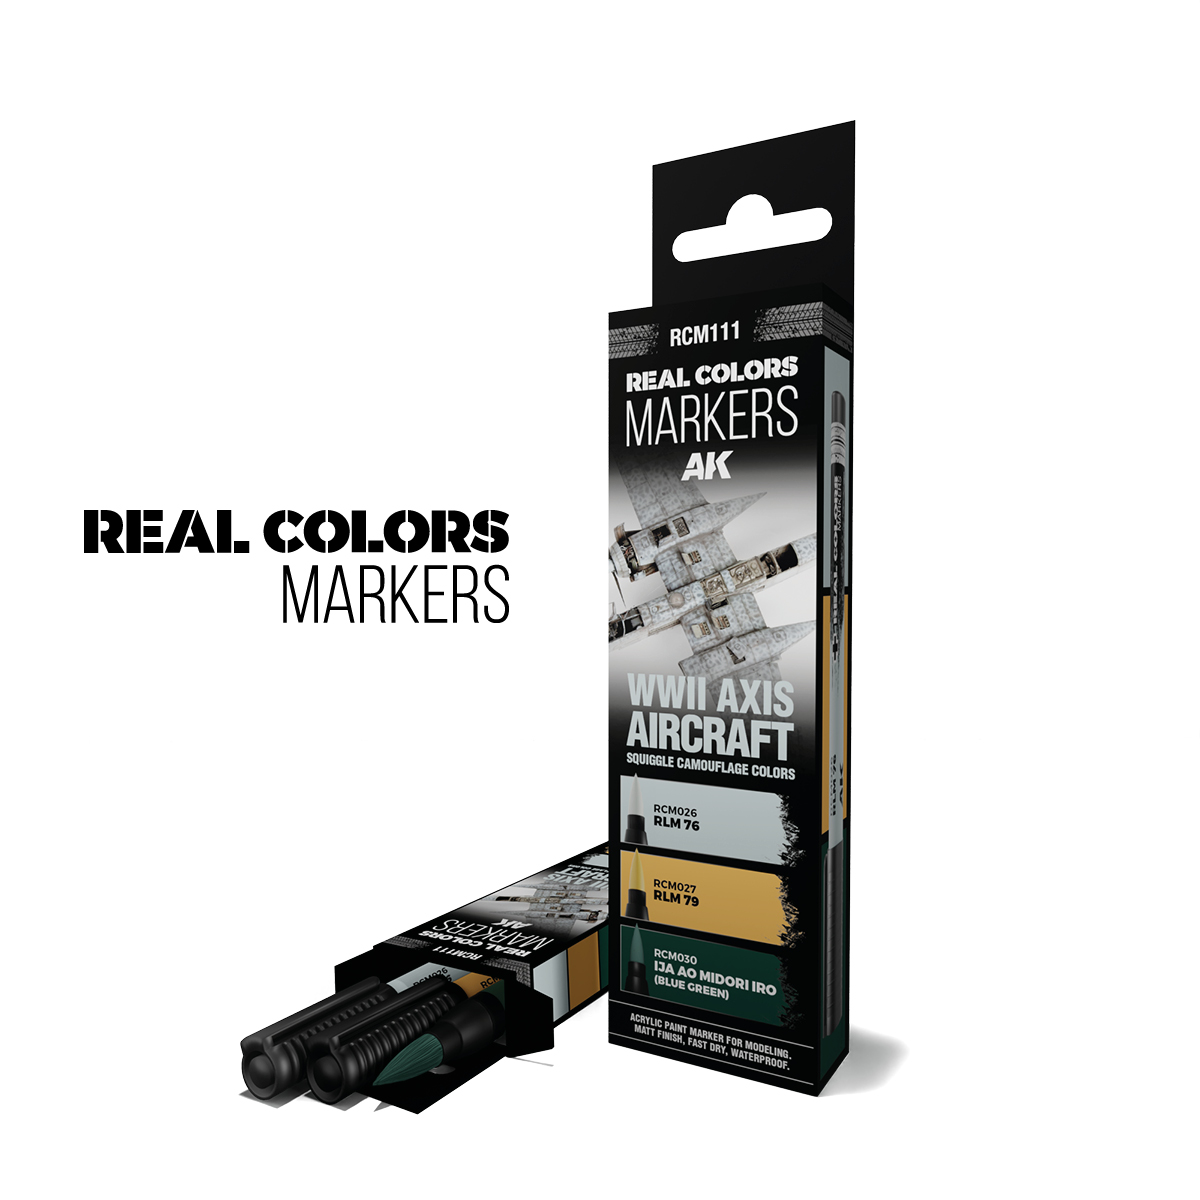 WWII AXIS AIRCRAFT SQUIGGLE CAMOUFLAGE COLORS – RC MARKERS SET